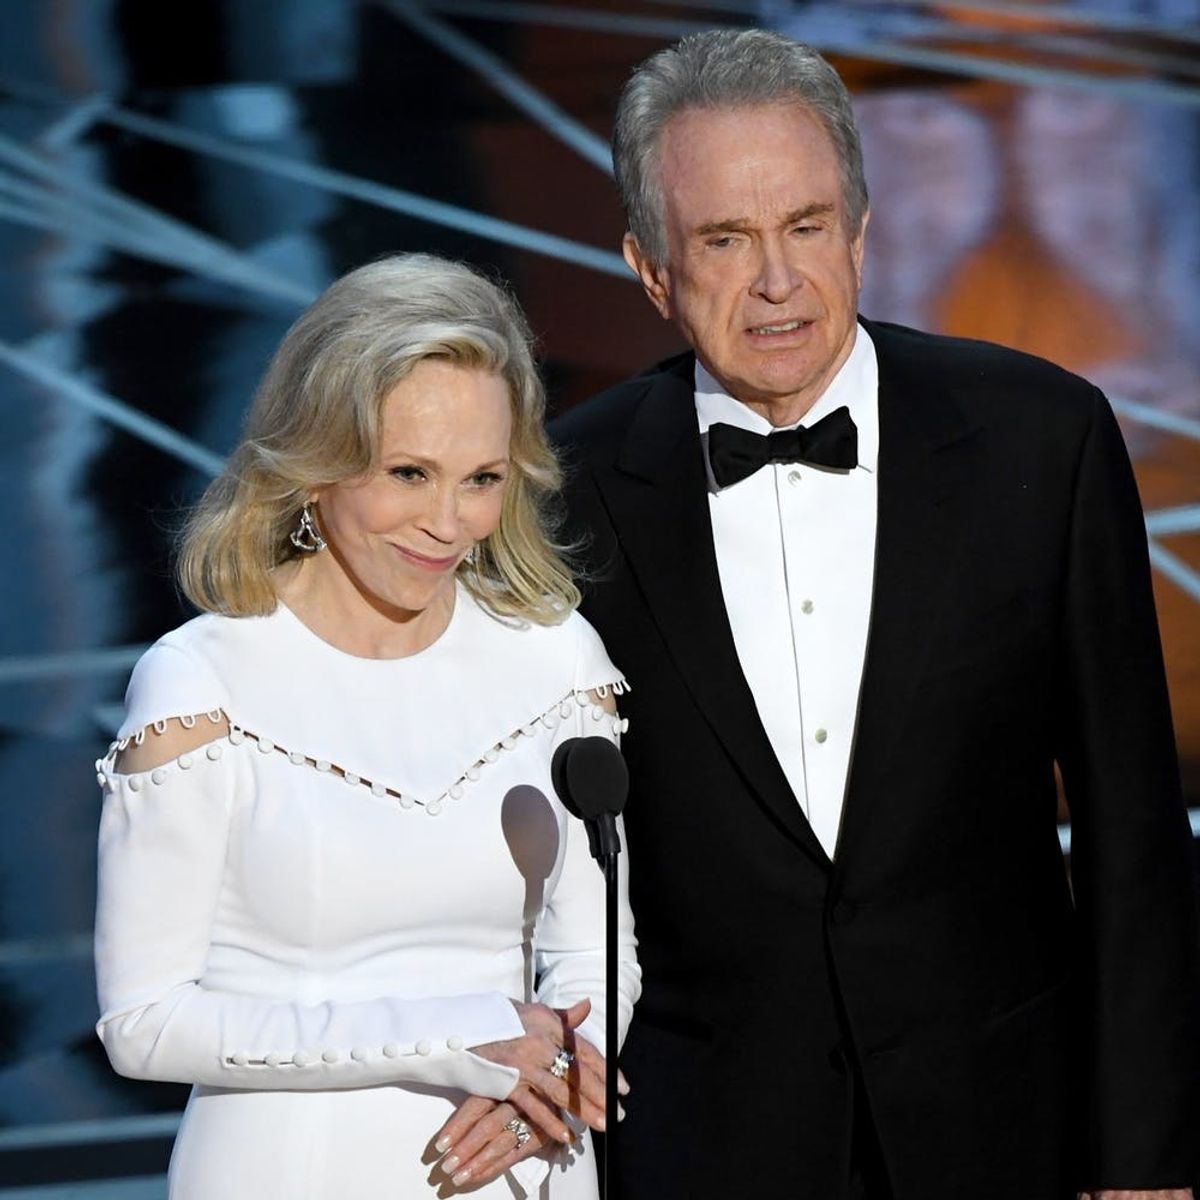 Faye Dunaway and Warren Beatty Will Return to the Oscars Stage to Present the Award for Best Picture